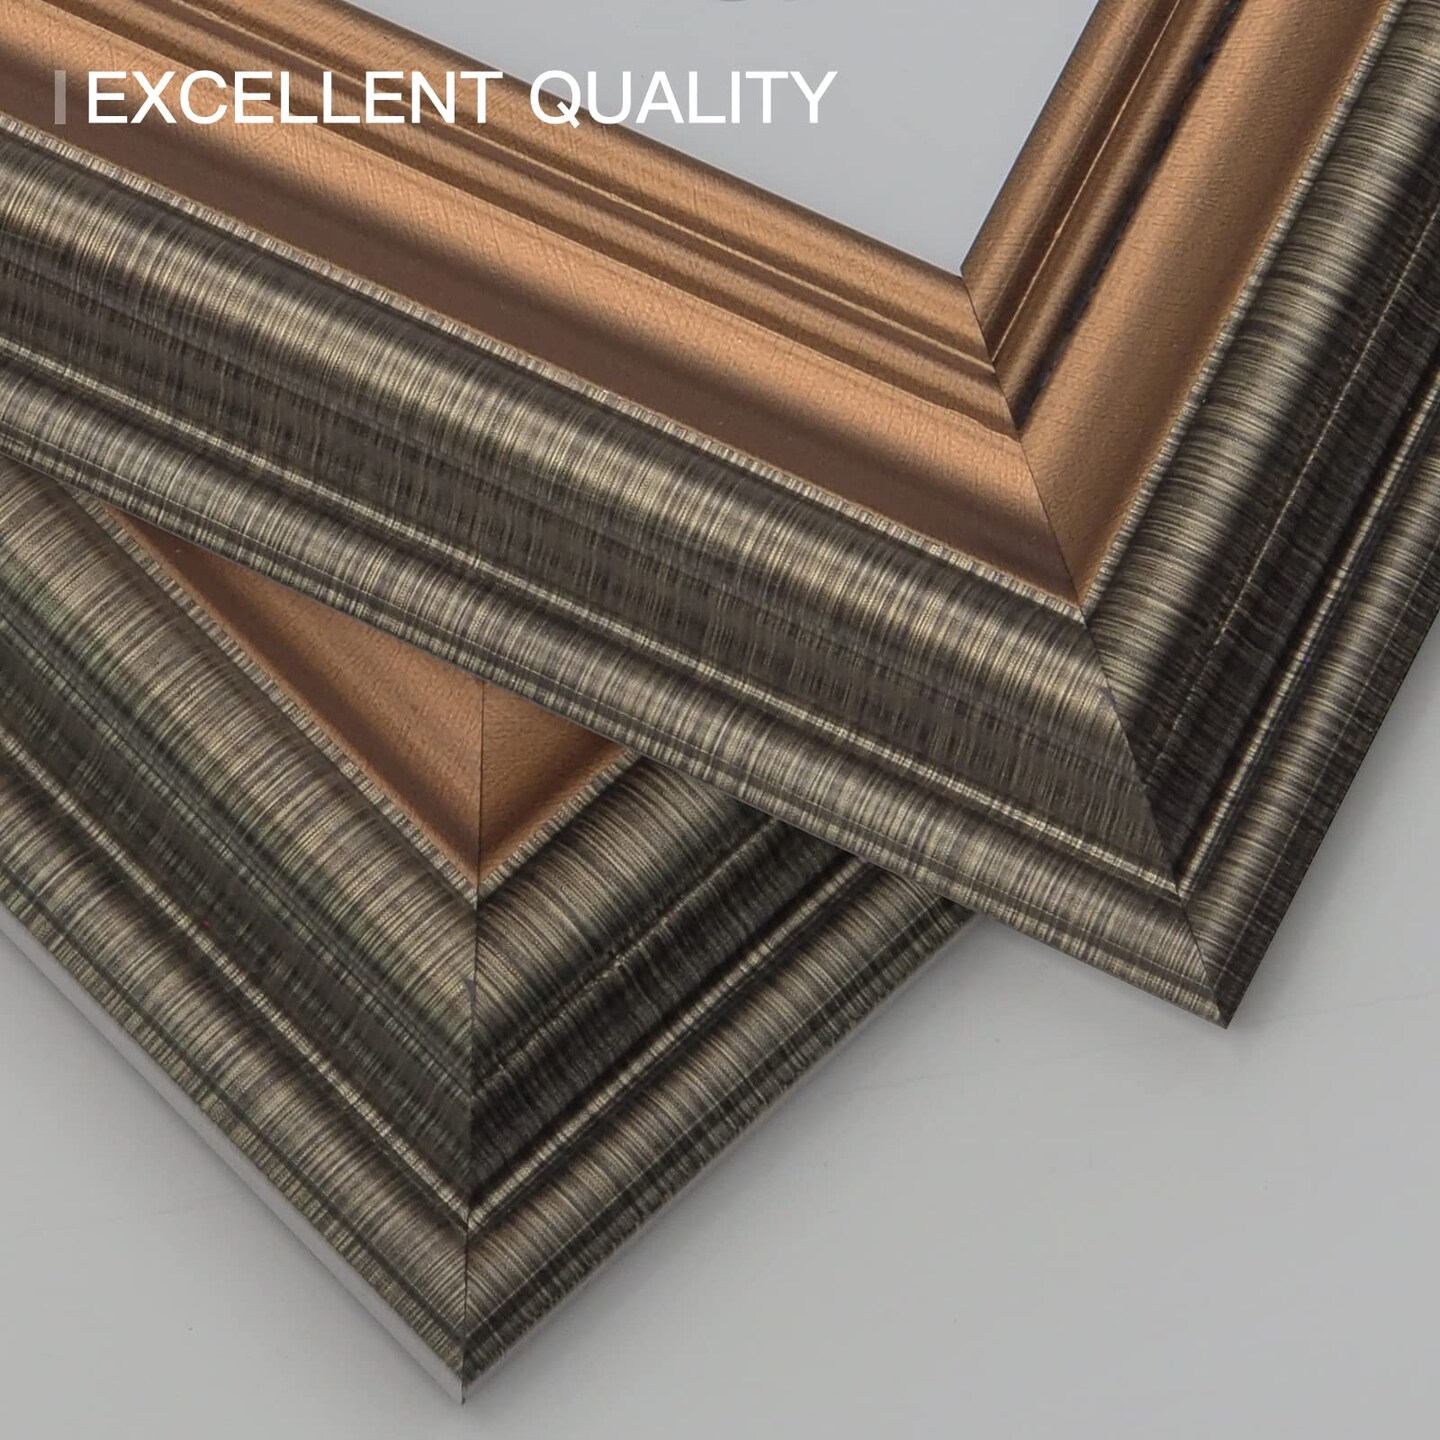 XUANLUO 8.5x11 Graduation Frames Certificate Document Frame with Tempered Glass Wood Grain Color Diploma Frames for Wall and Tabletop Brown 1 Pack